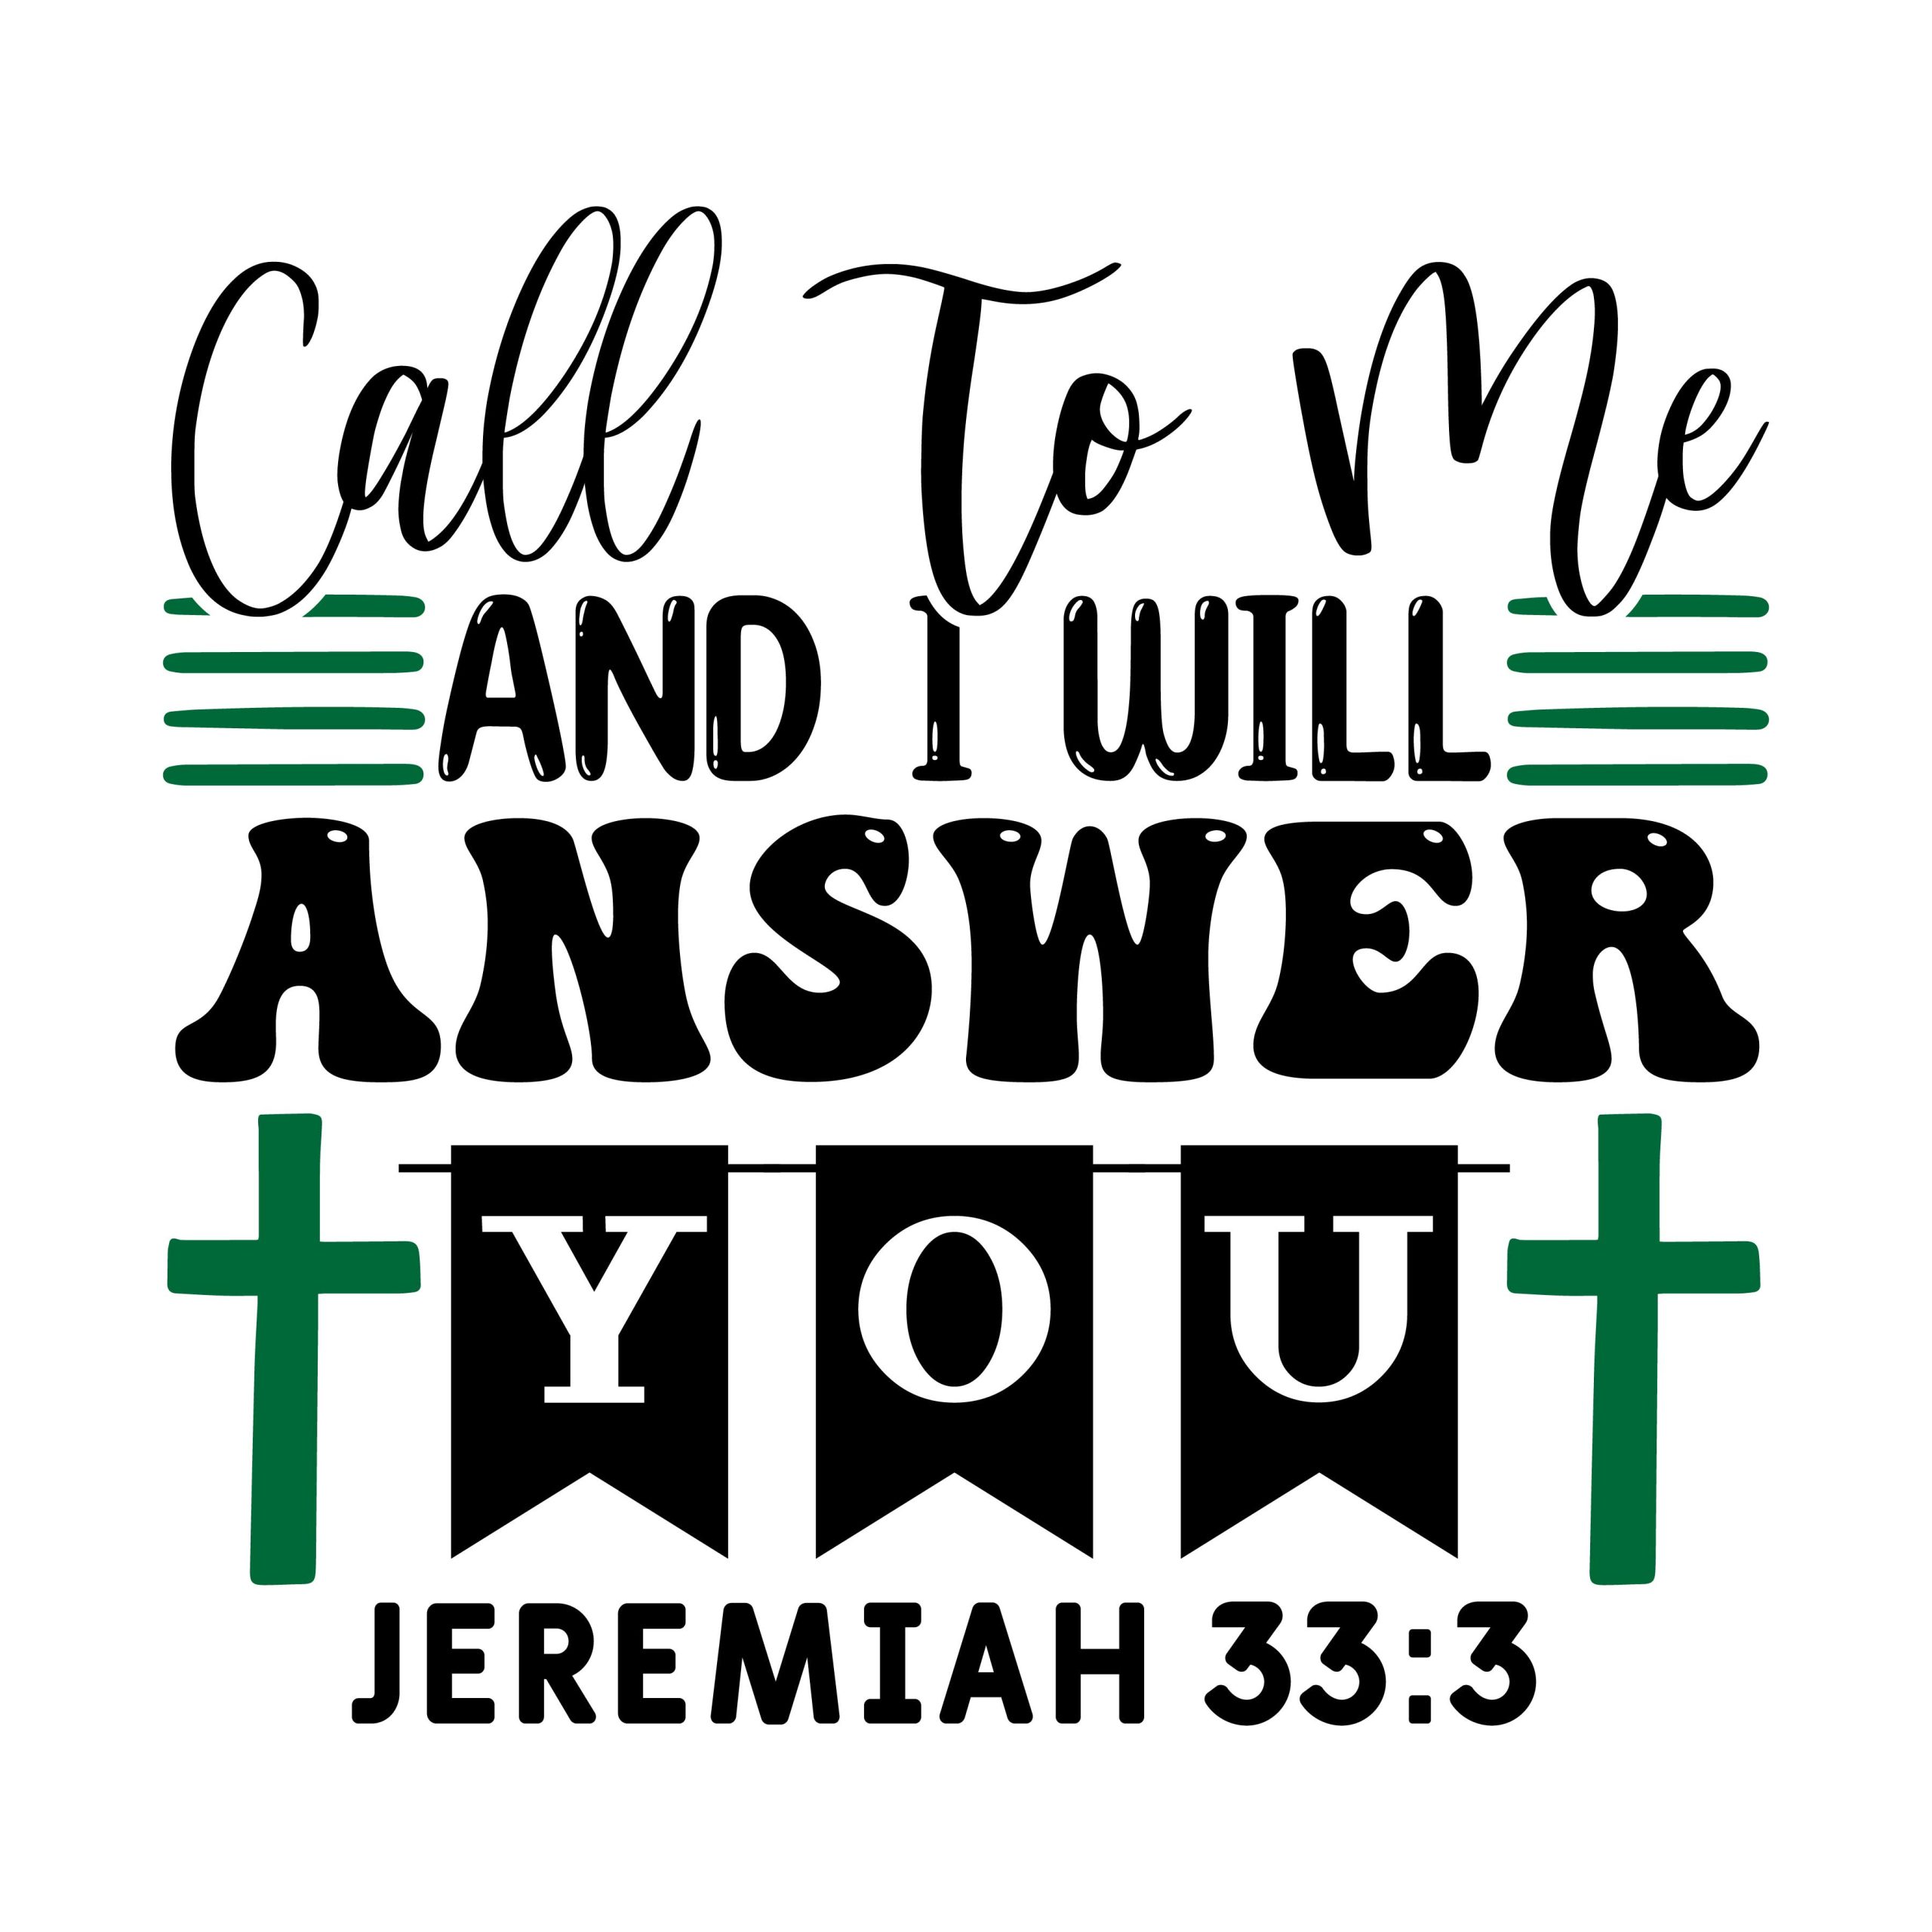 Call to me and i will answer you Jeremiah 33:3, bible verses, scripture verses, svg files, passages, sayings, cricut designs, silhouette, embroidery, bundle, free cut files, design space, vector